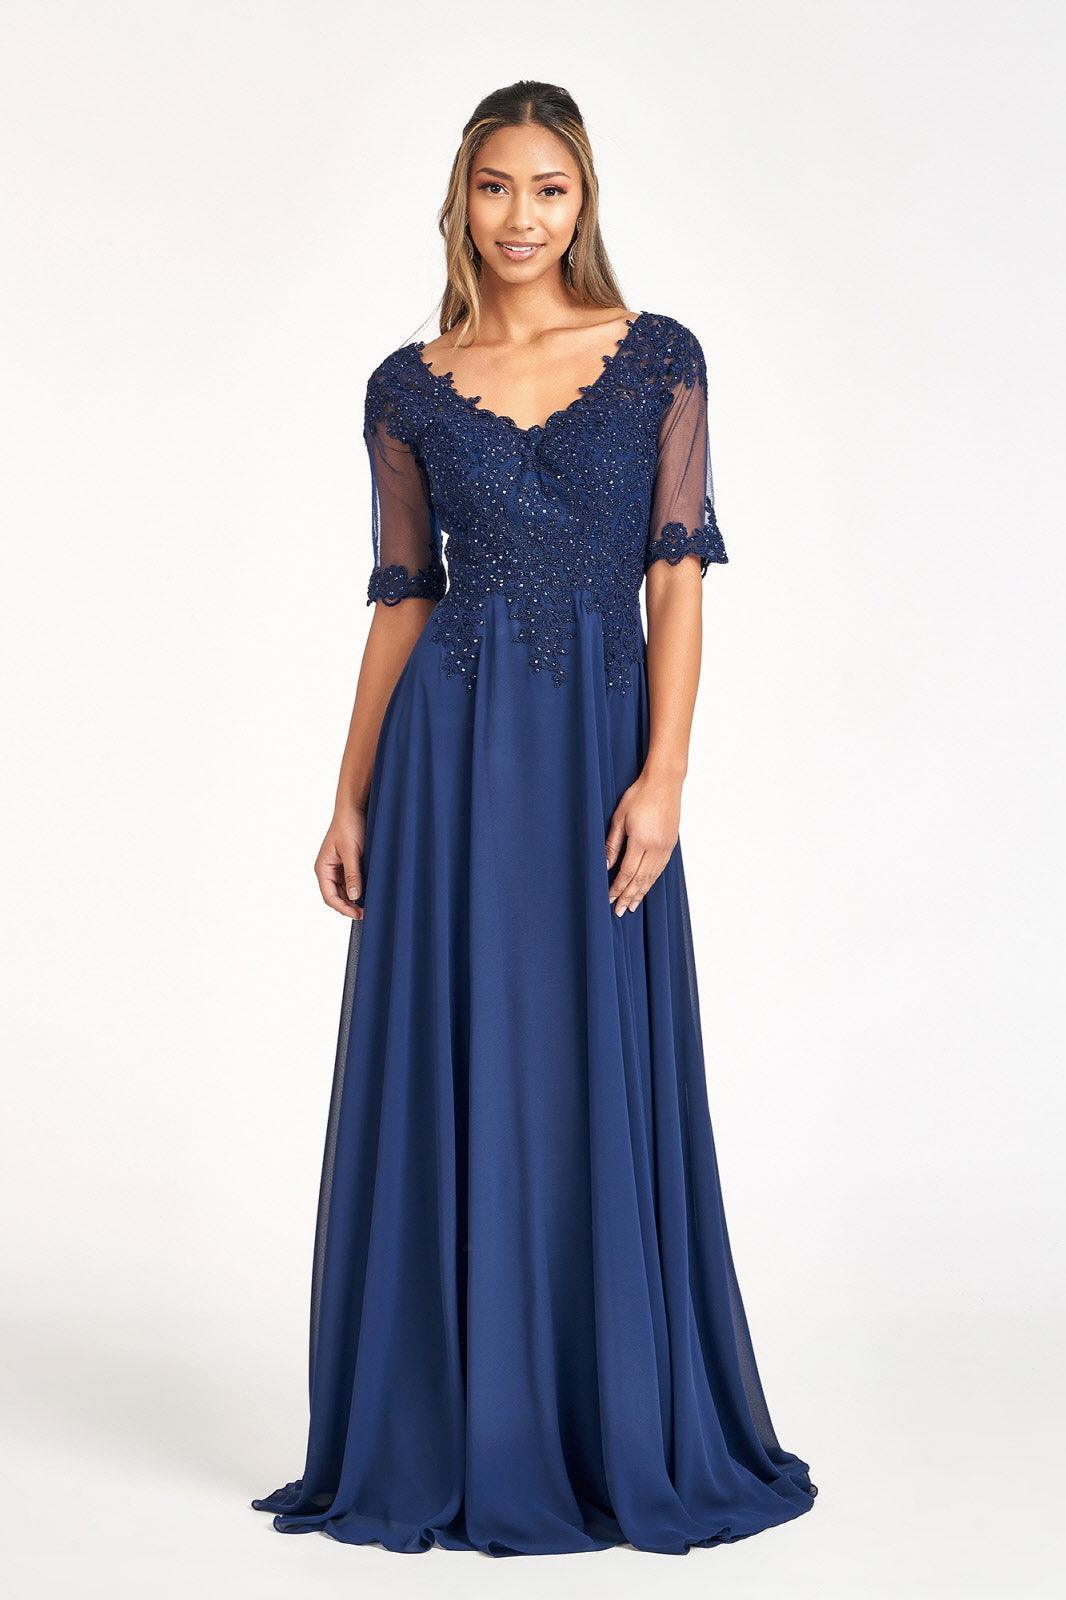 Long 3/4 Sleeve Mother of the Bride Formal Dress - The Dress Outlet